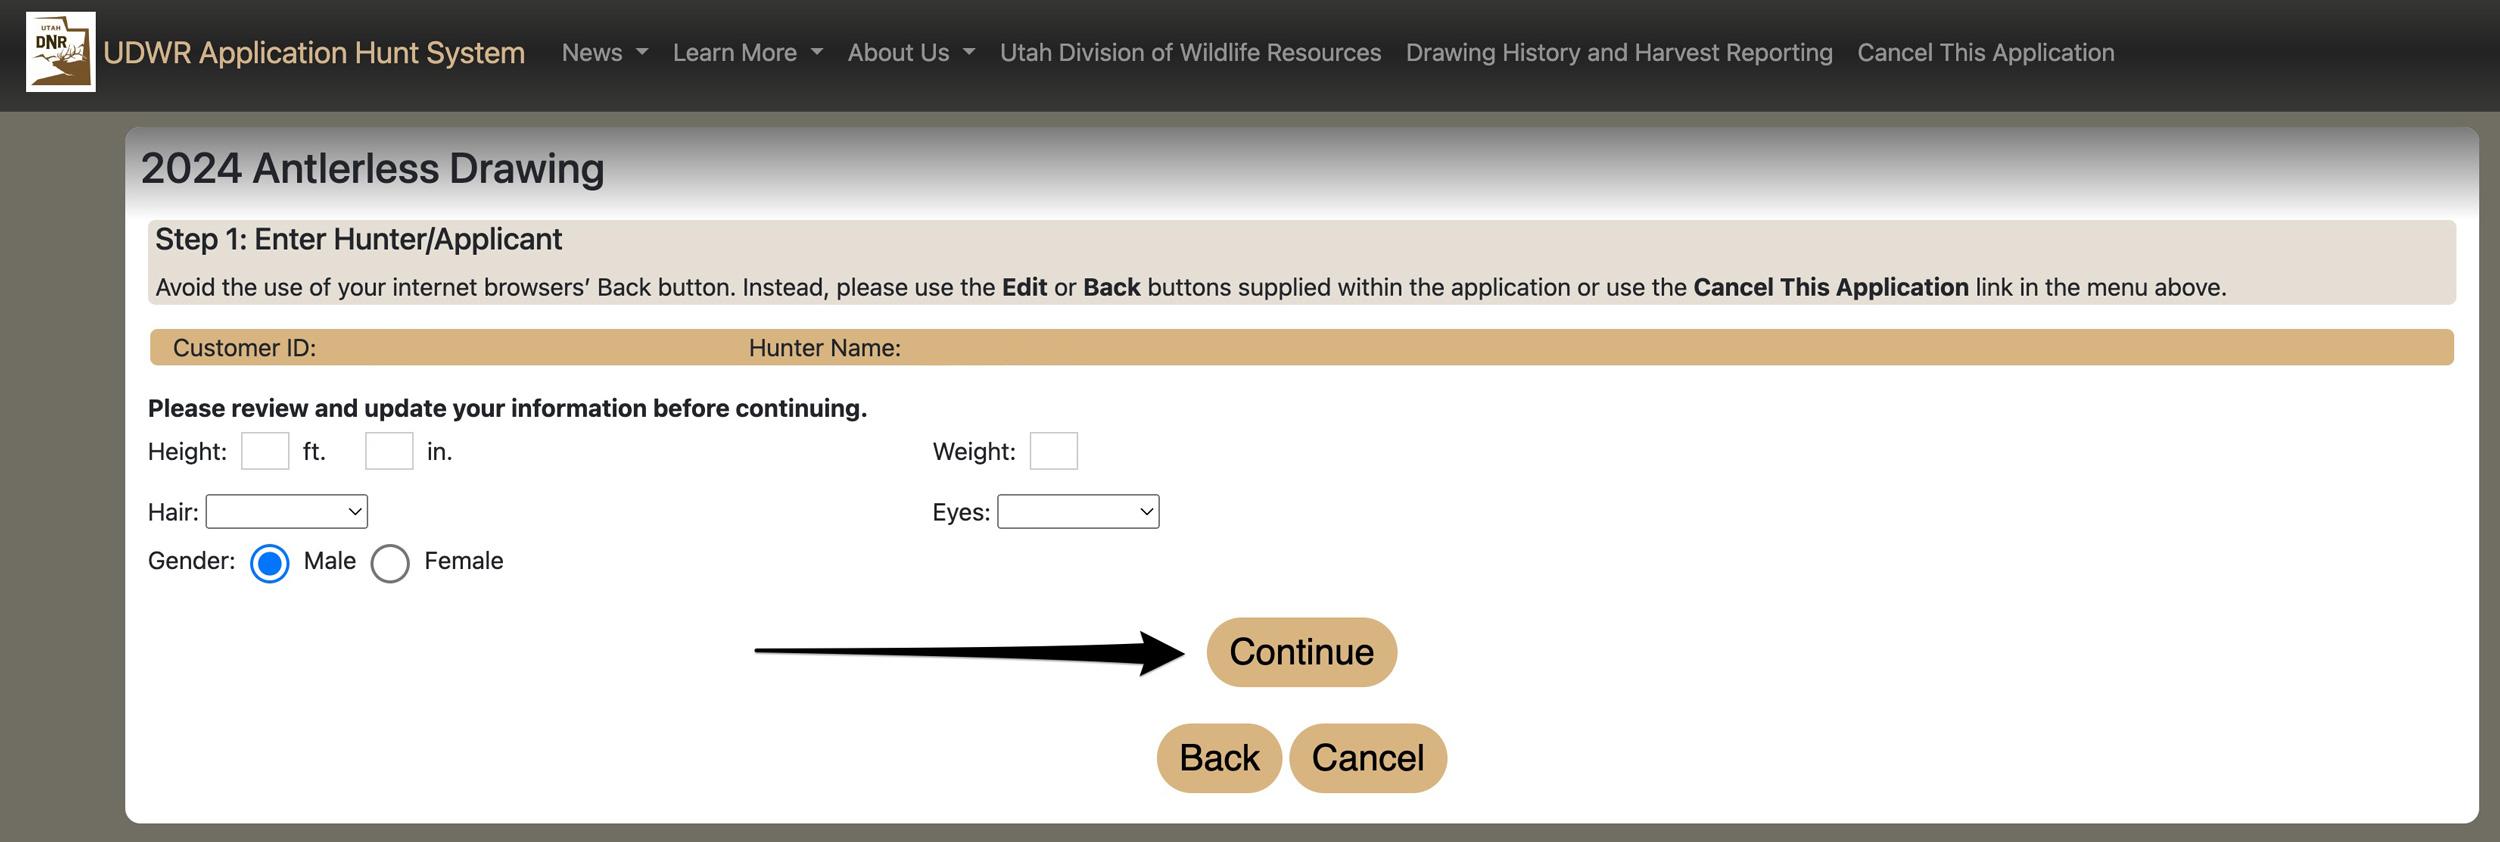 Verify height, hair, gender, eye color, and weight for Utah licensing account